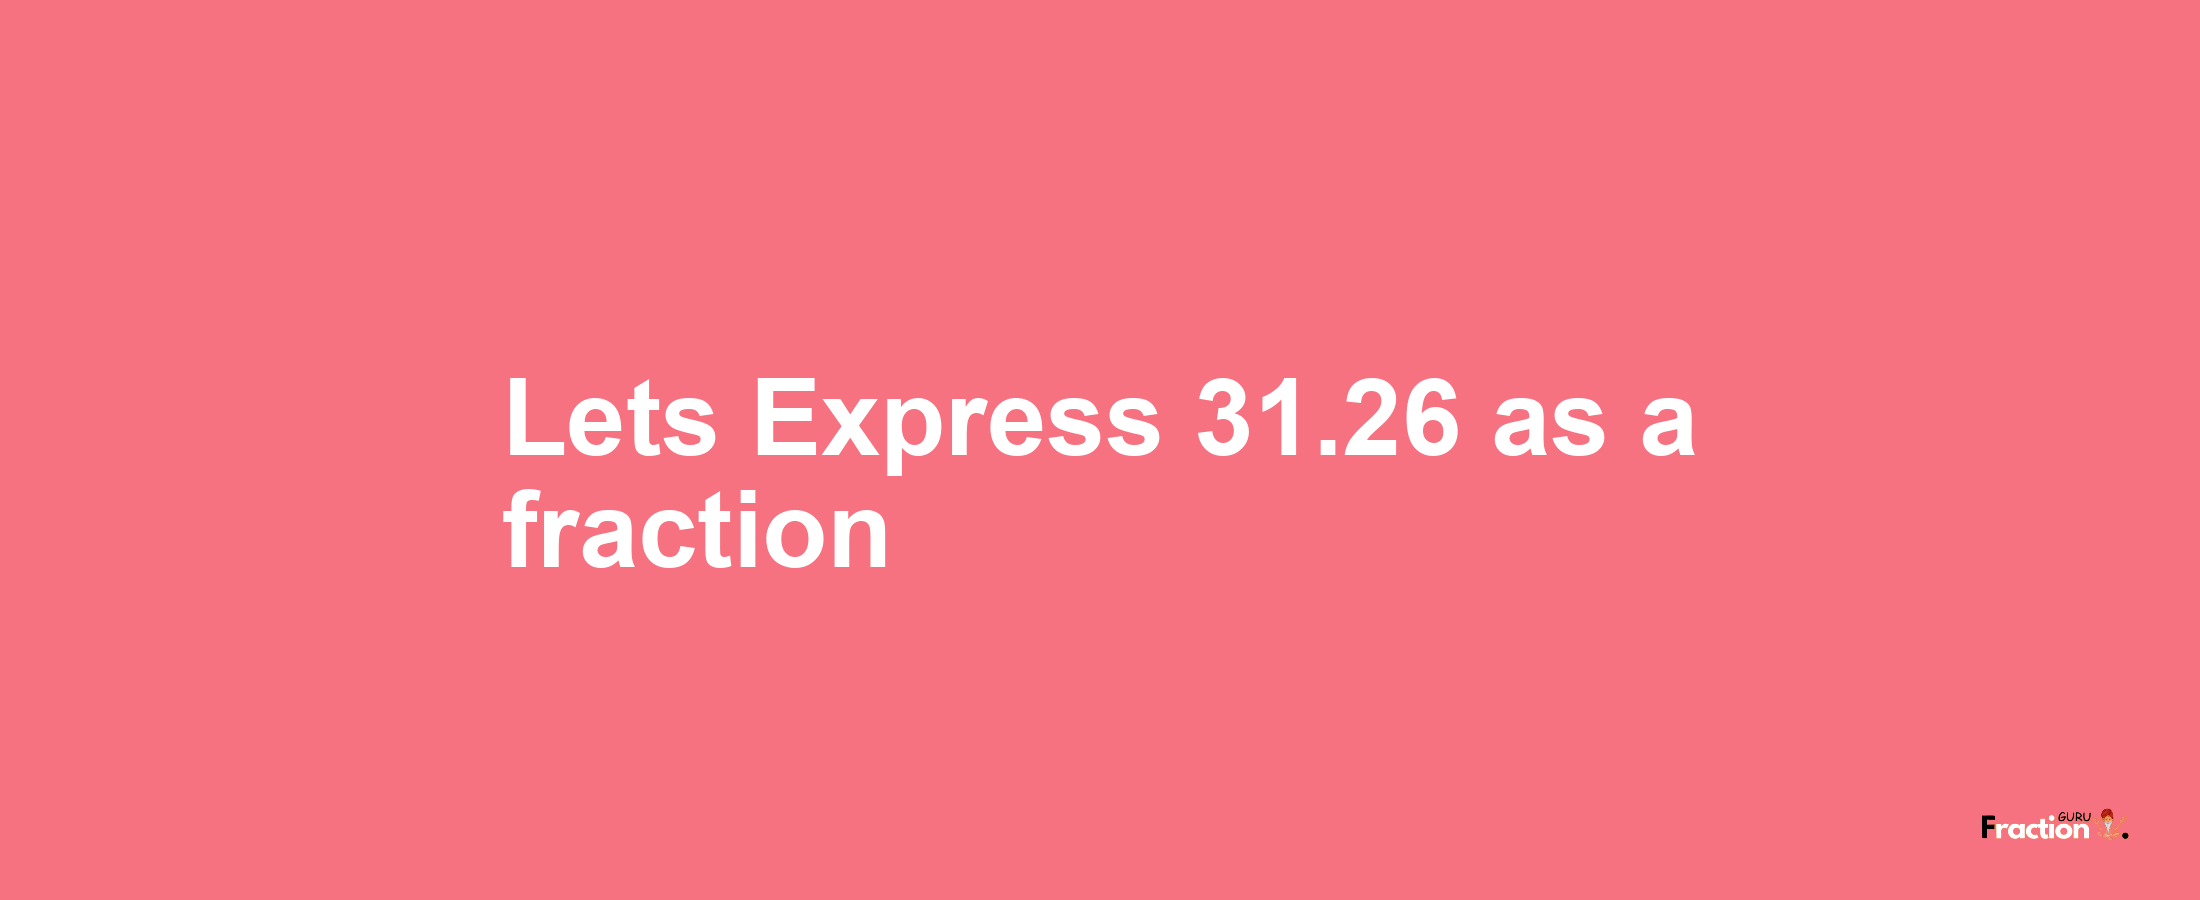 Lets Express 31.26 as afraction